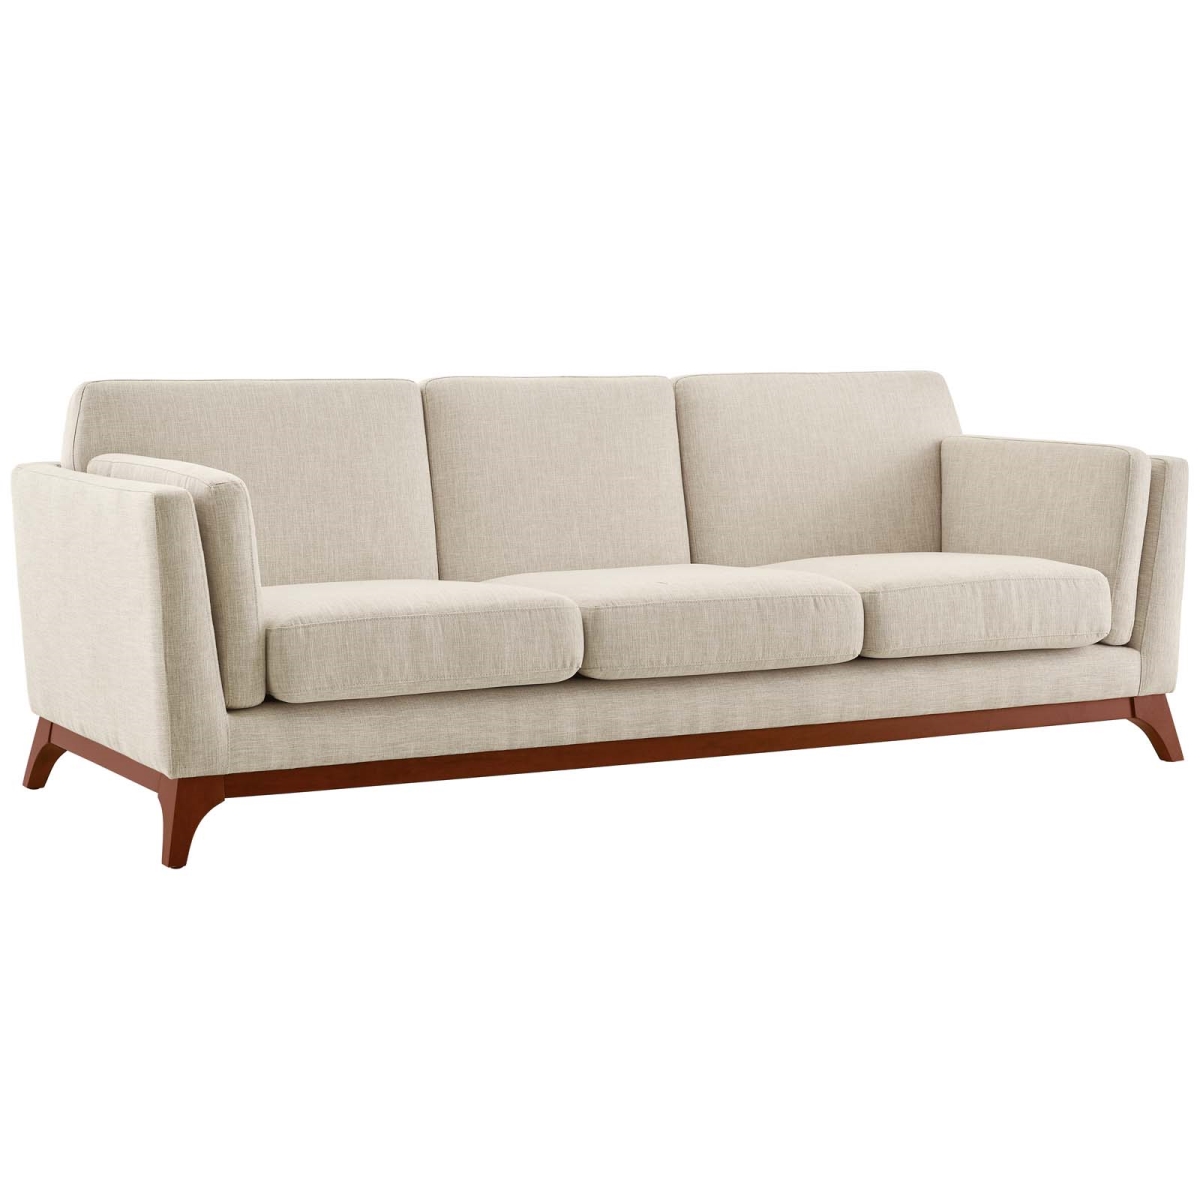 Eei-3062-bei Chance Upholstered Fabric Sofa - Beige, 30 X 35 X 83.5 In.